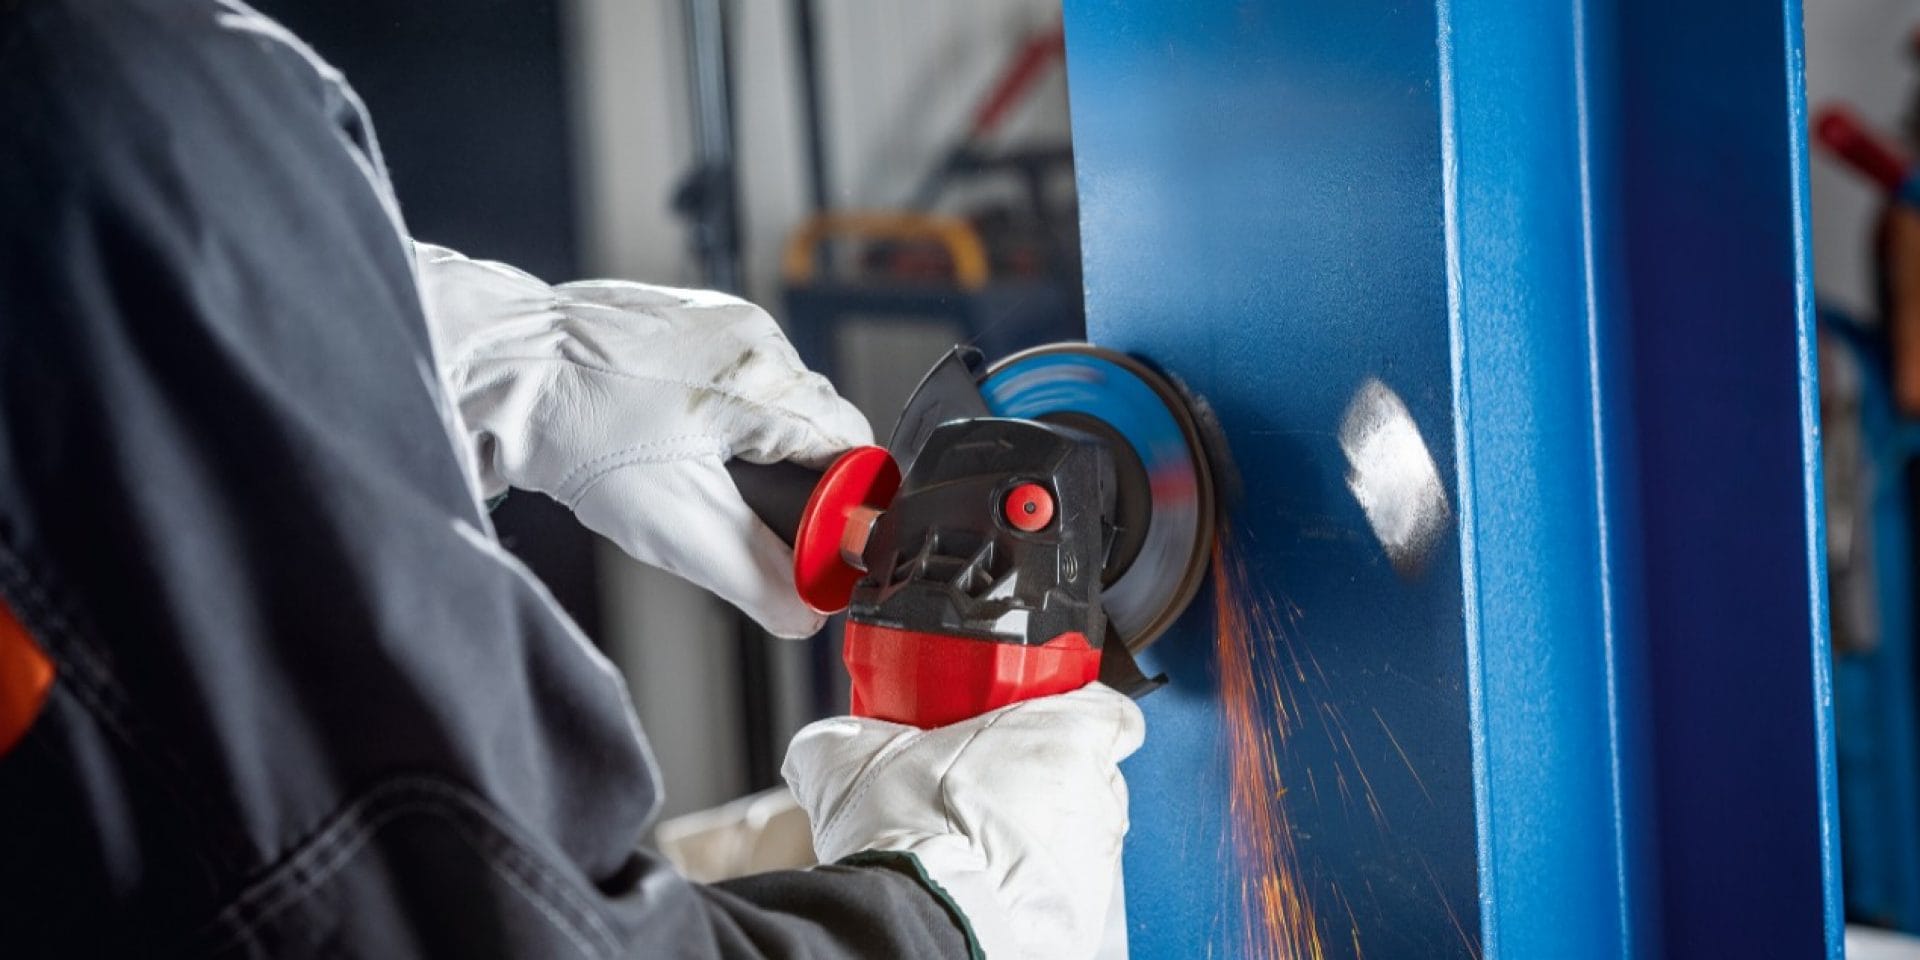 Preparing the coated steel using an angle grinder